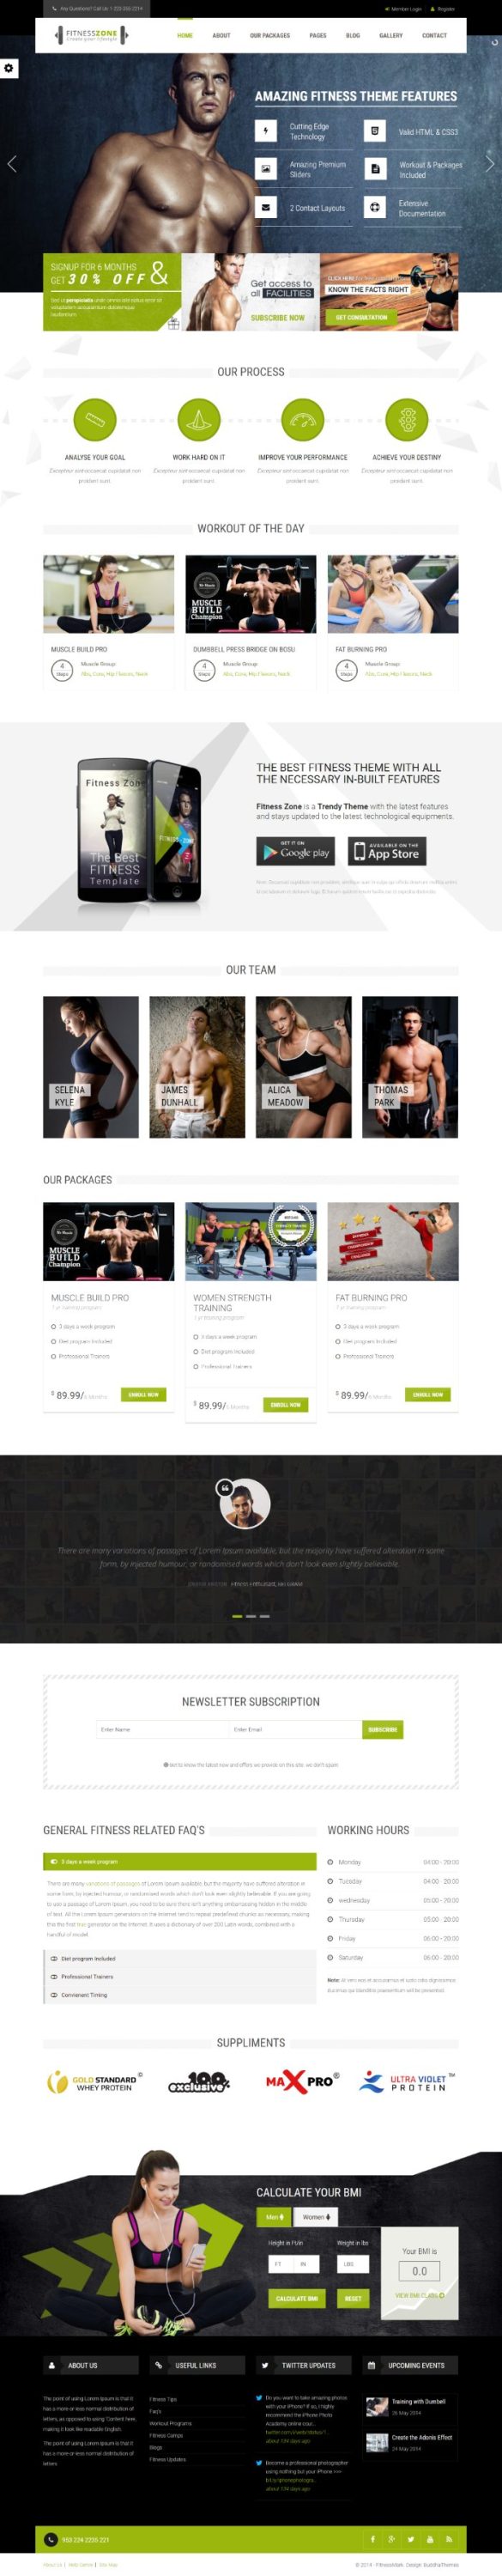 Mẫu website dịch vụ phòng tập gym - Fitness and gym 1